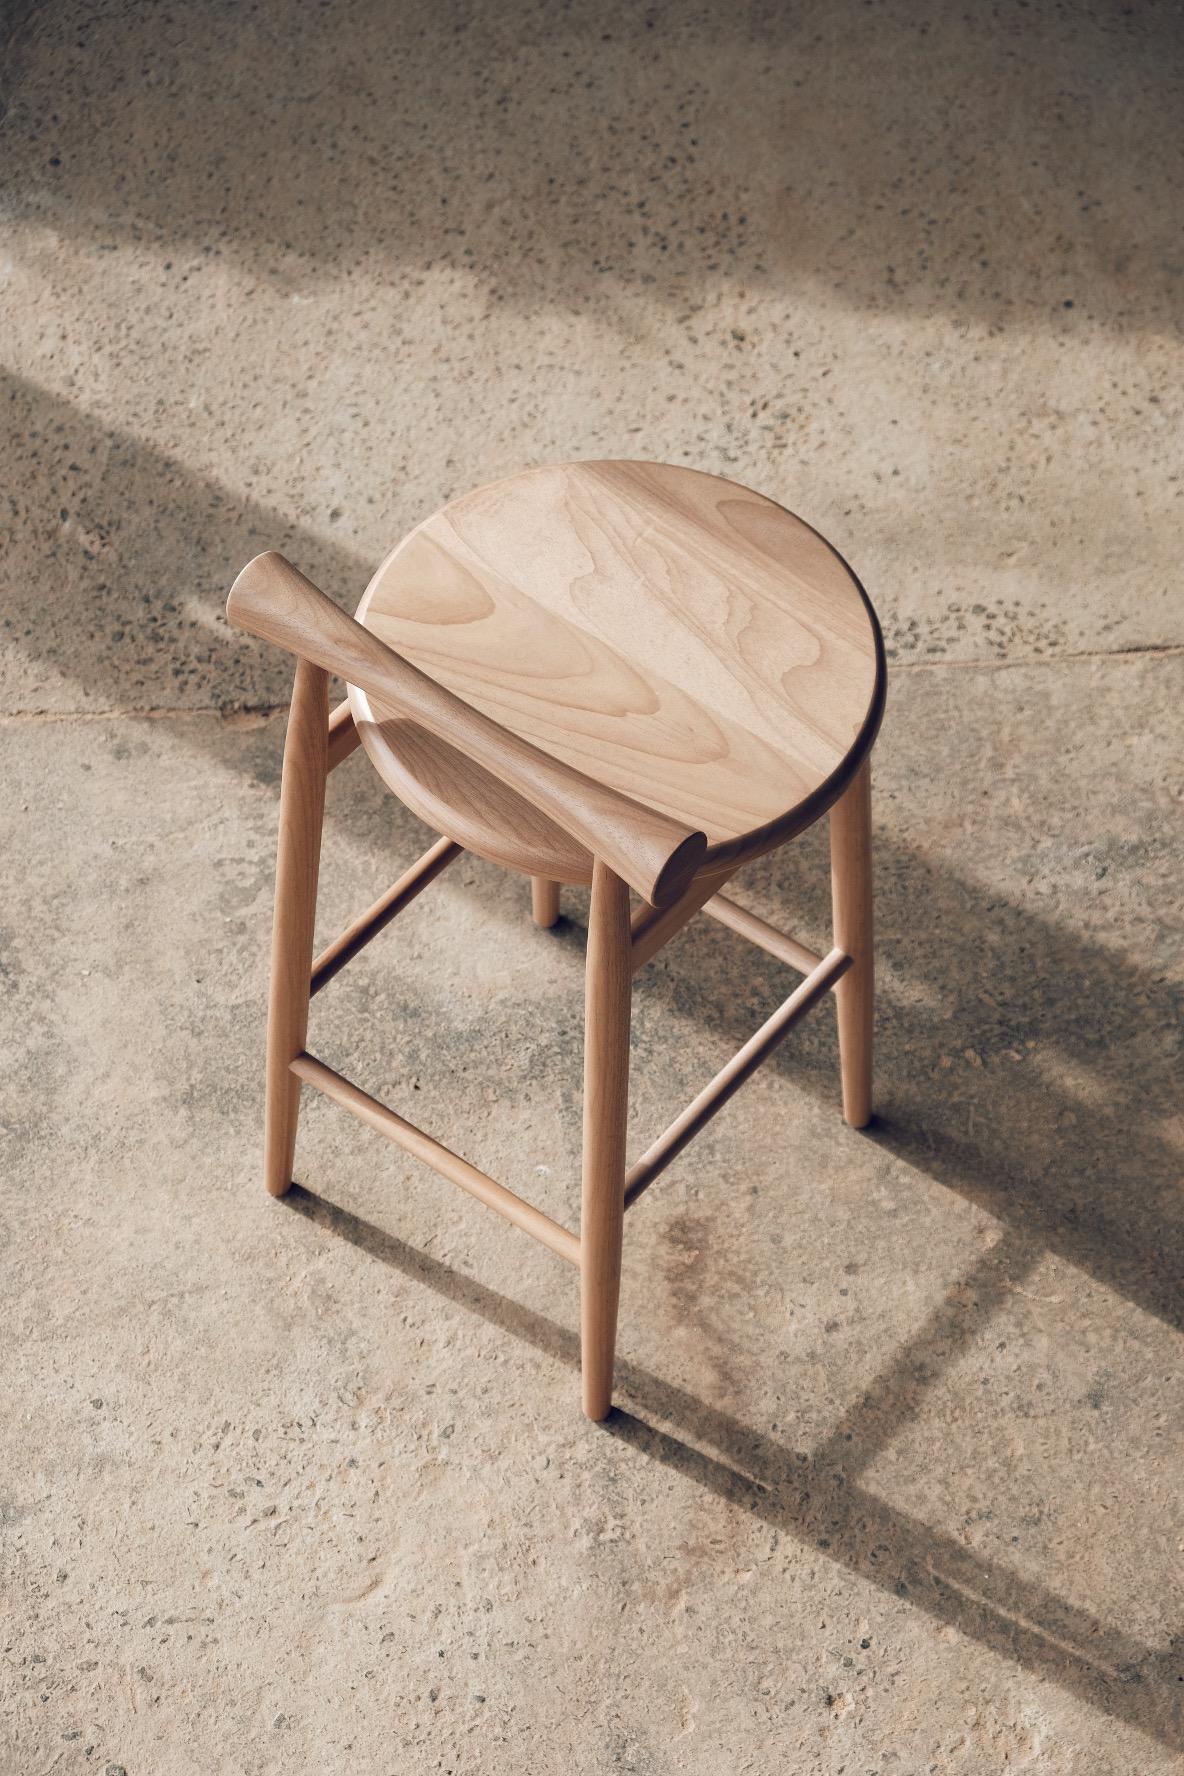 This stool is thought and made to please the eyes. It's design and craftsmanship combined create a unique piece of furniture with a strong statement. The charming protagonist in Its design is the lathe turned low backrest, made of the finest